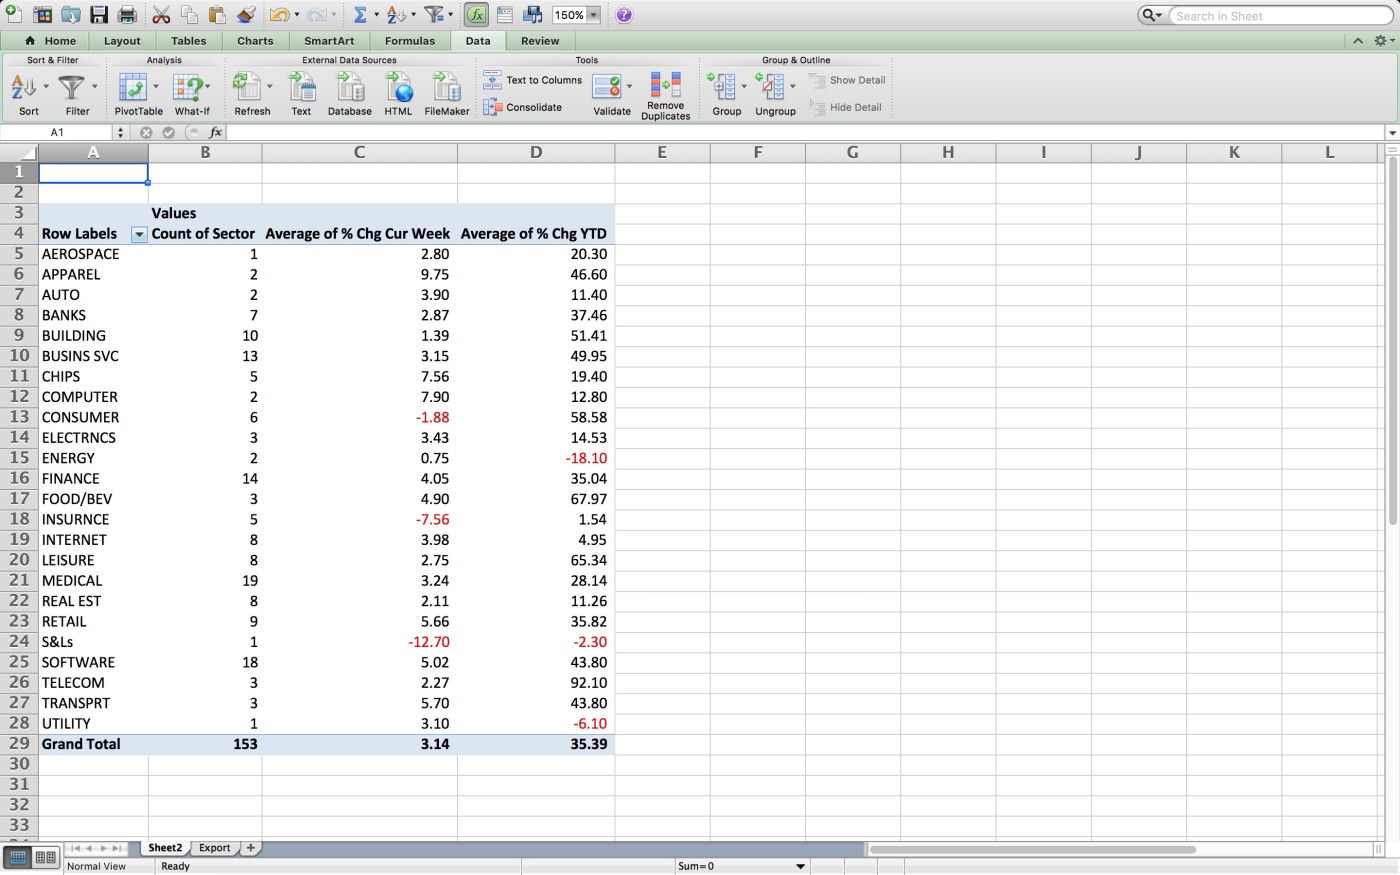 How To Create A Pivot Table In Microsoft Excel